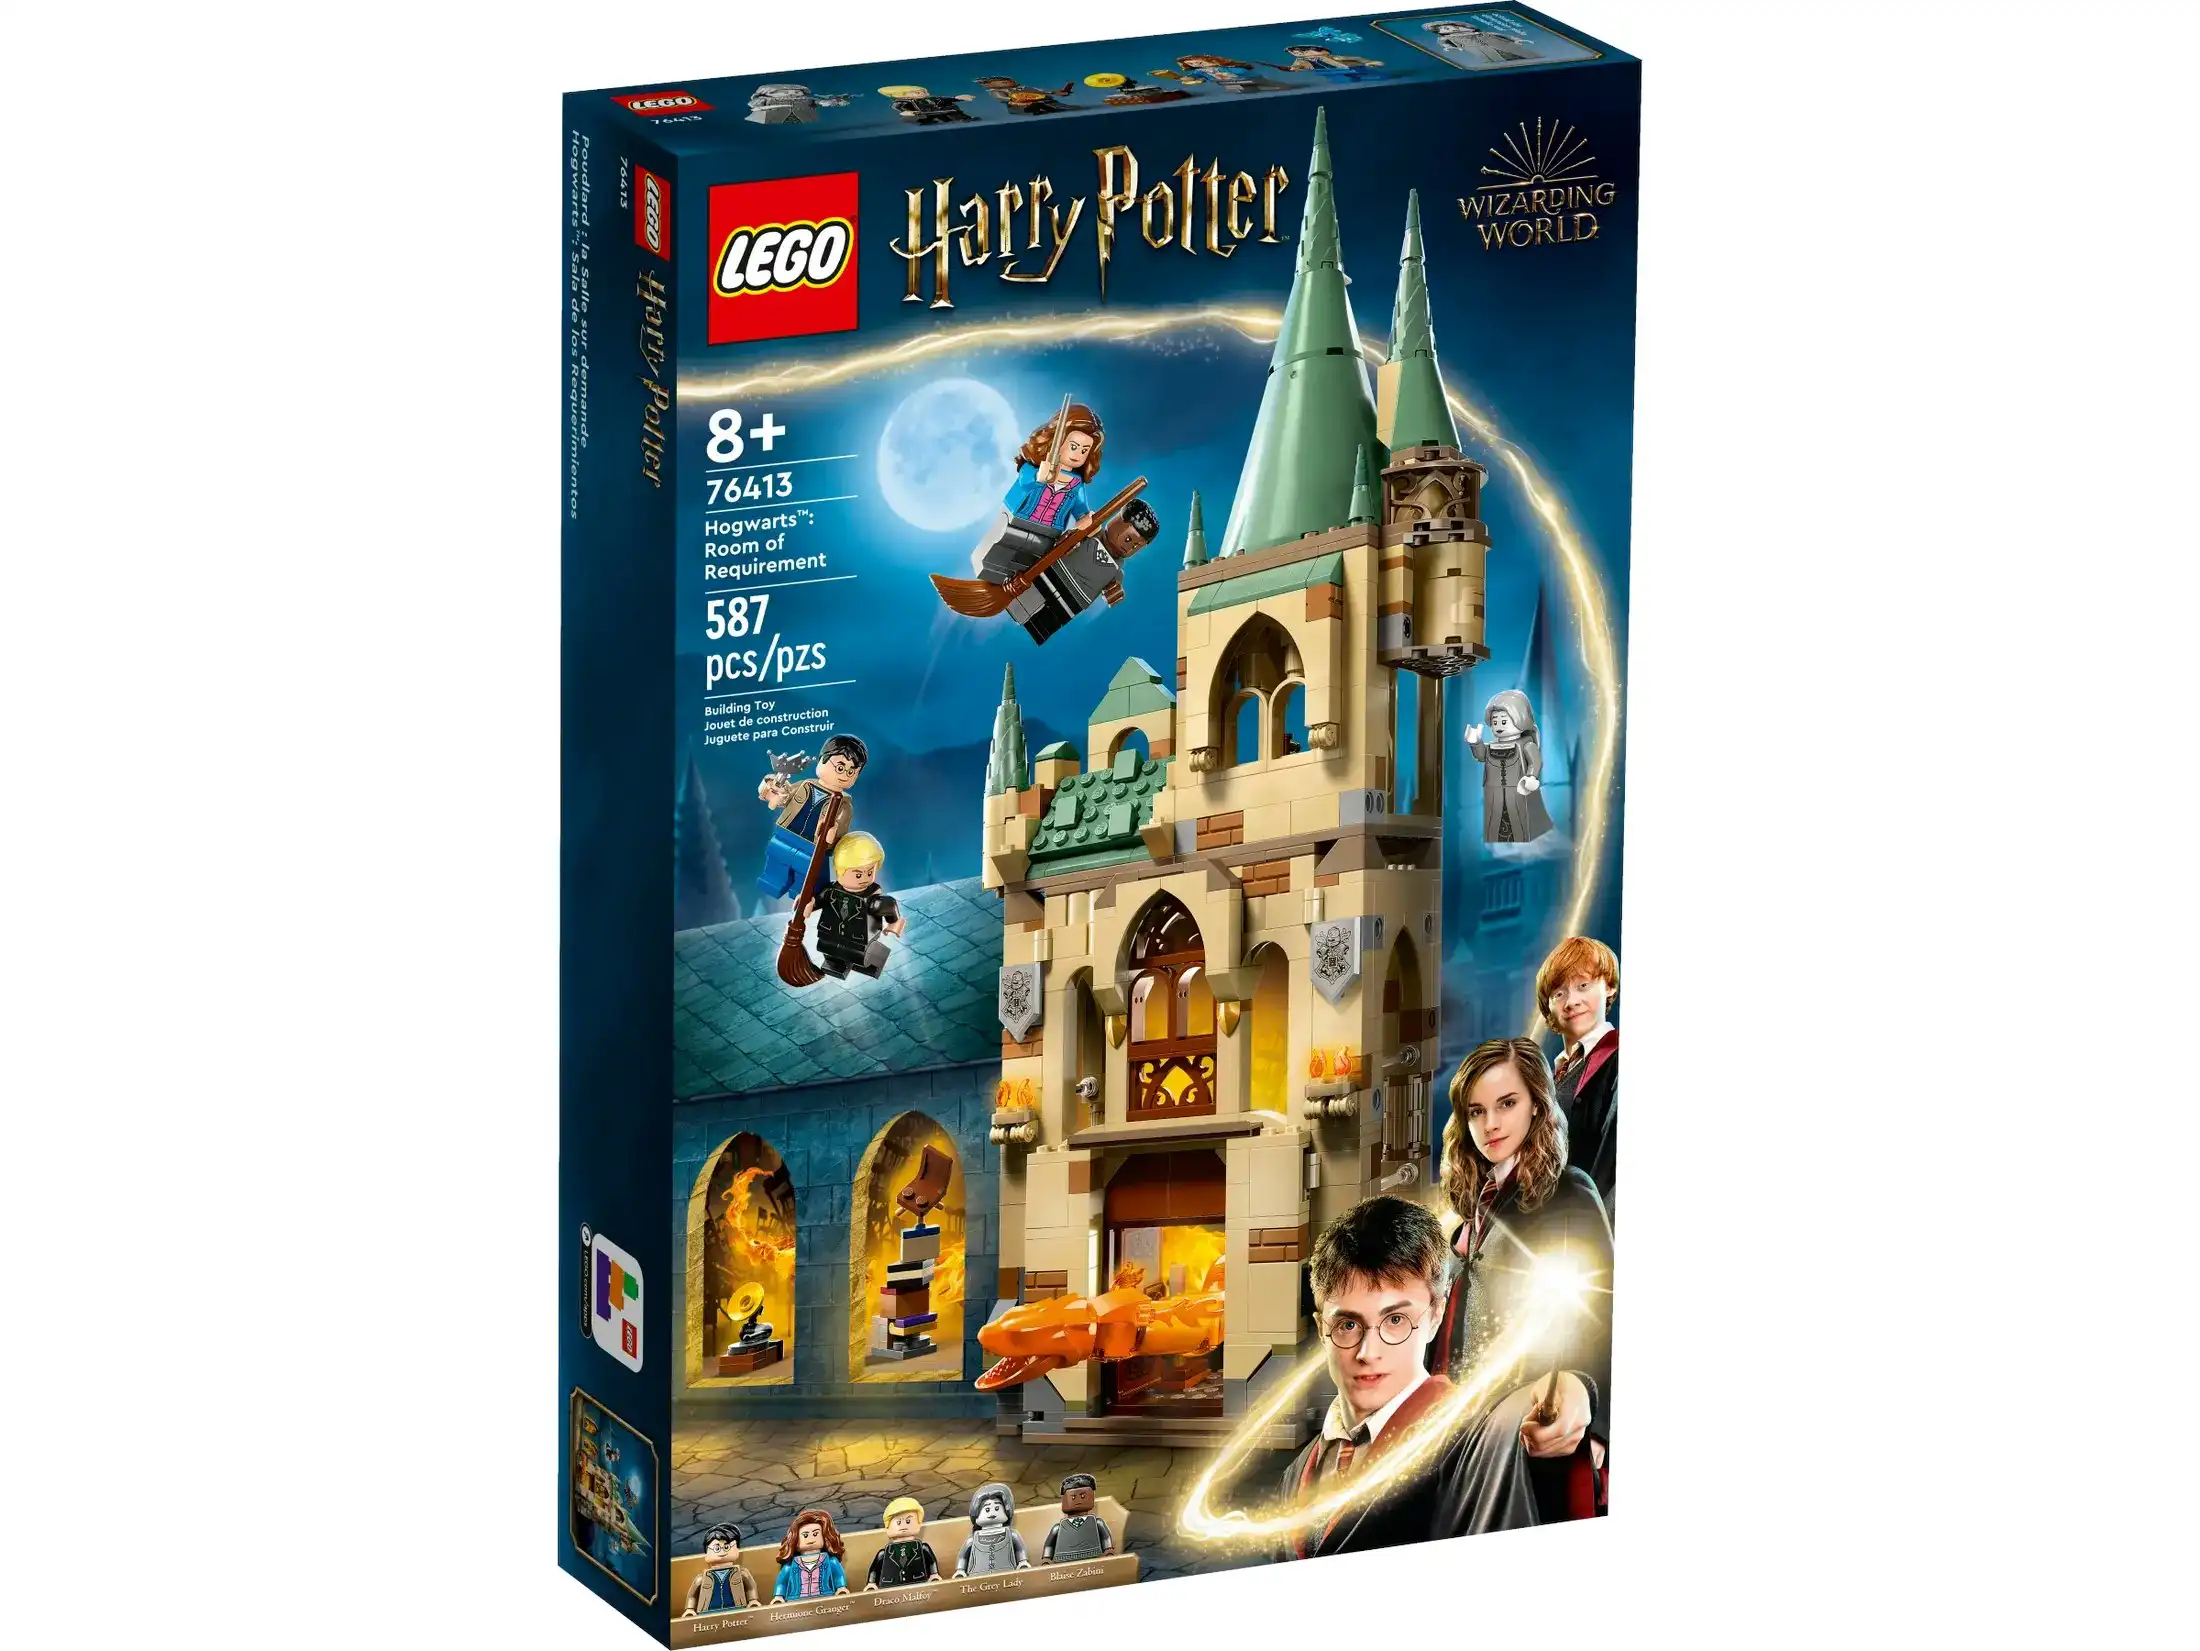 LEGO 76413 Hogwarts Room of Requirement - Harry Potter